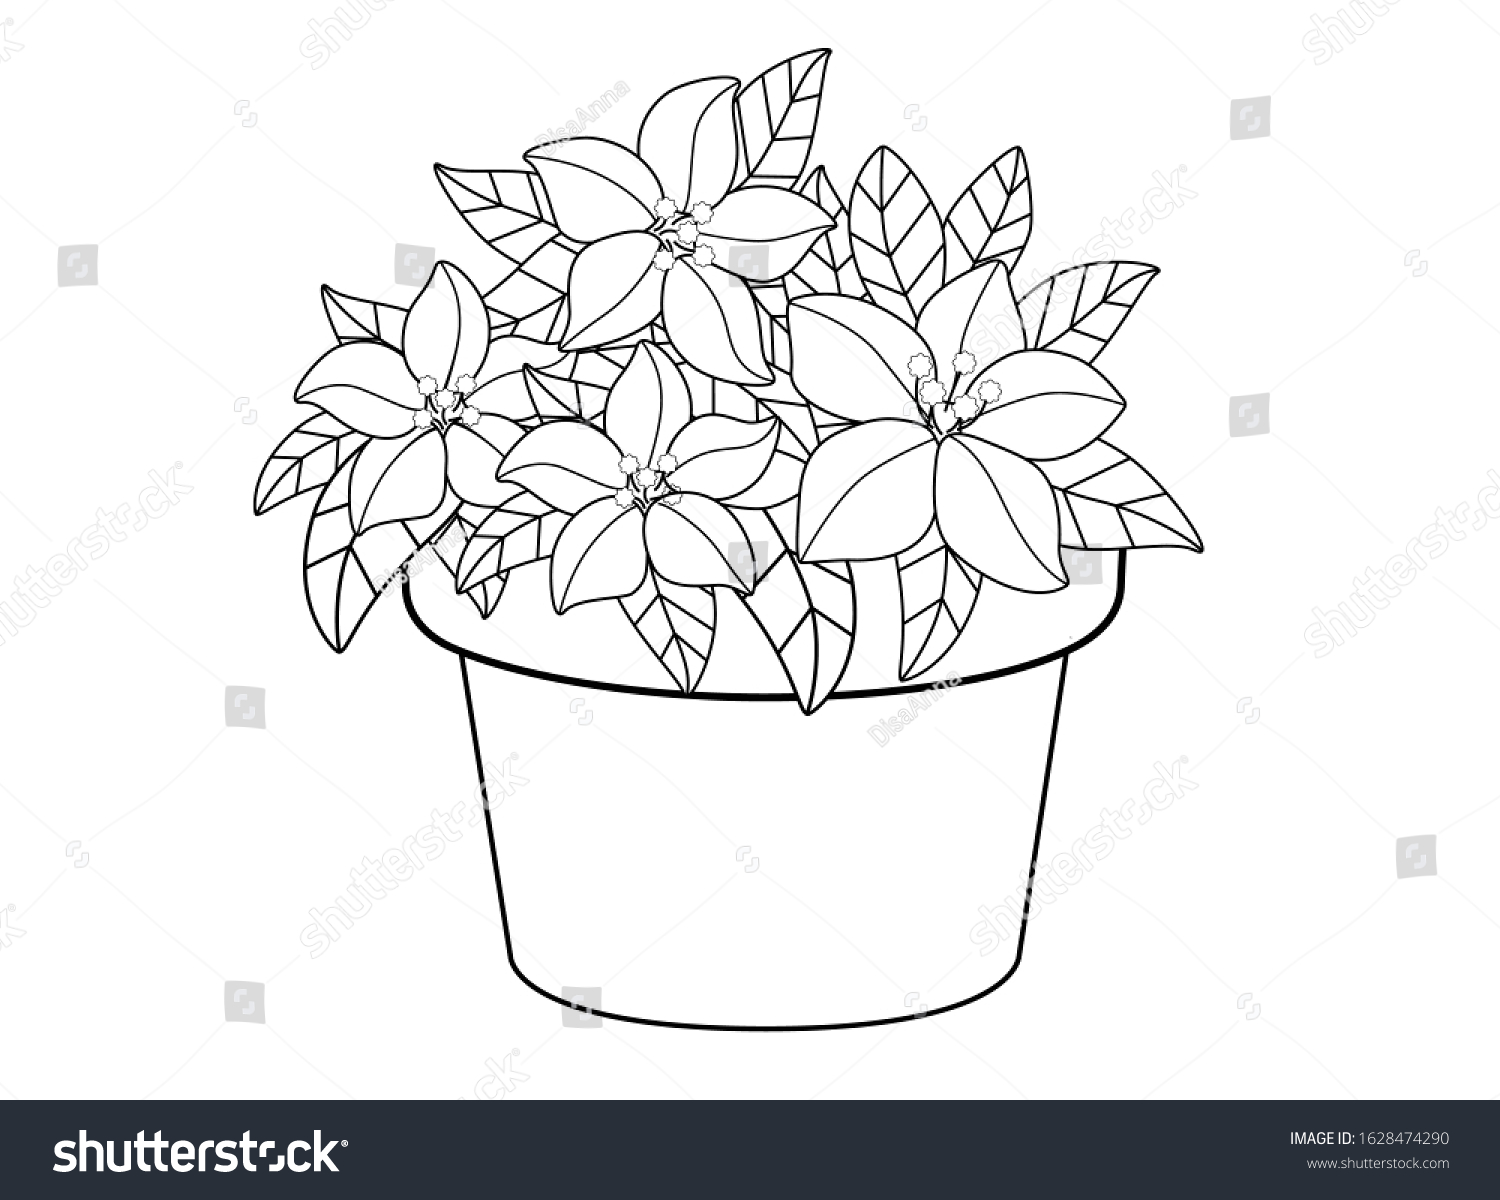 Flowerpot Flowers Vector Linear Drawing Coloring Stock ...